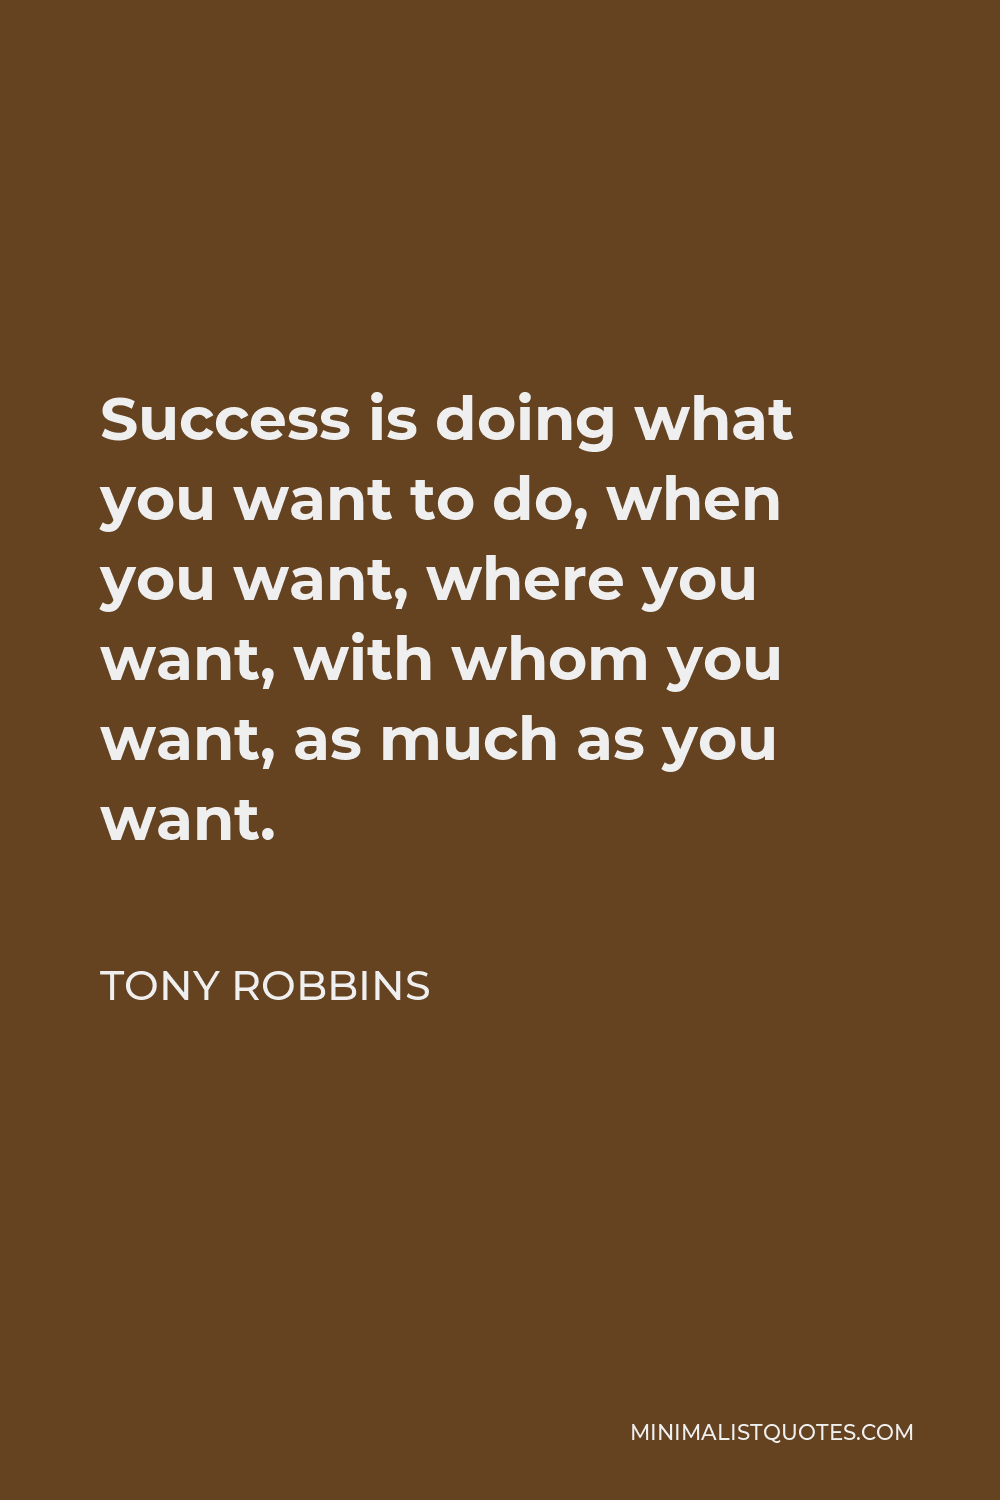 Tony Robbins Quote - Success is doing what you want to do, when you want, where you want, with whom you want, as much as you want.